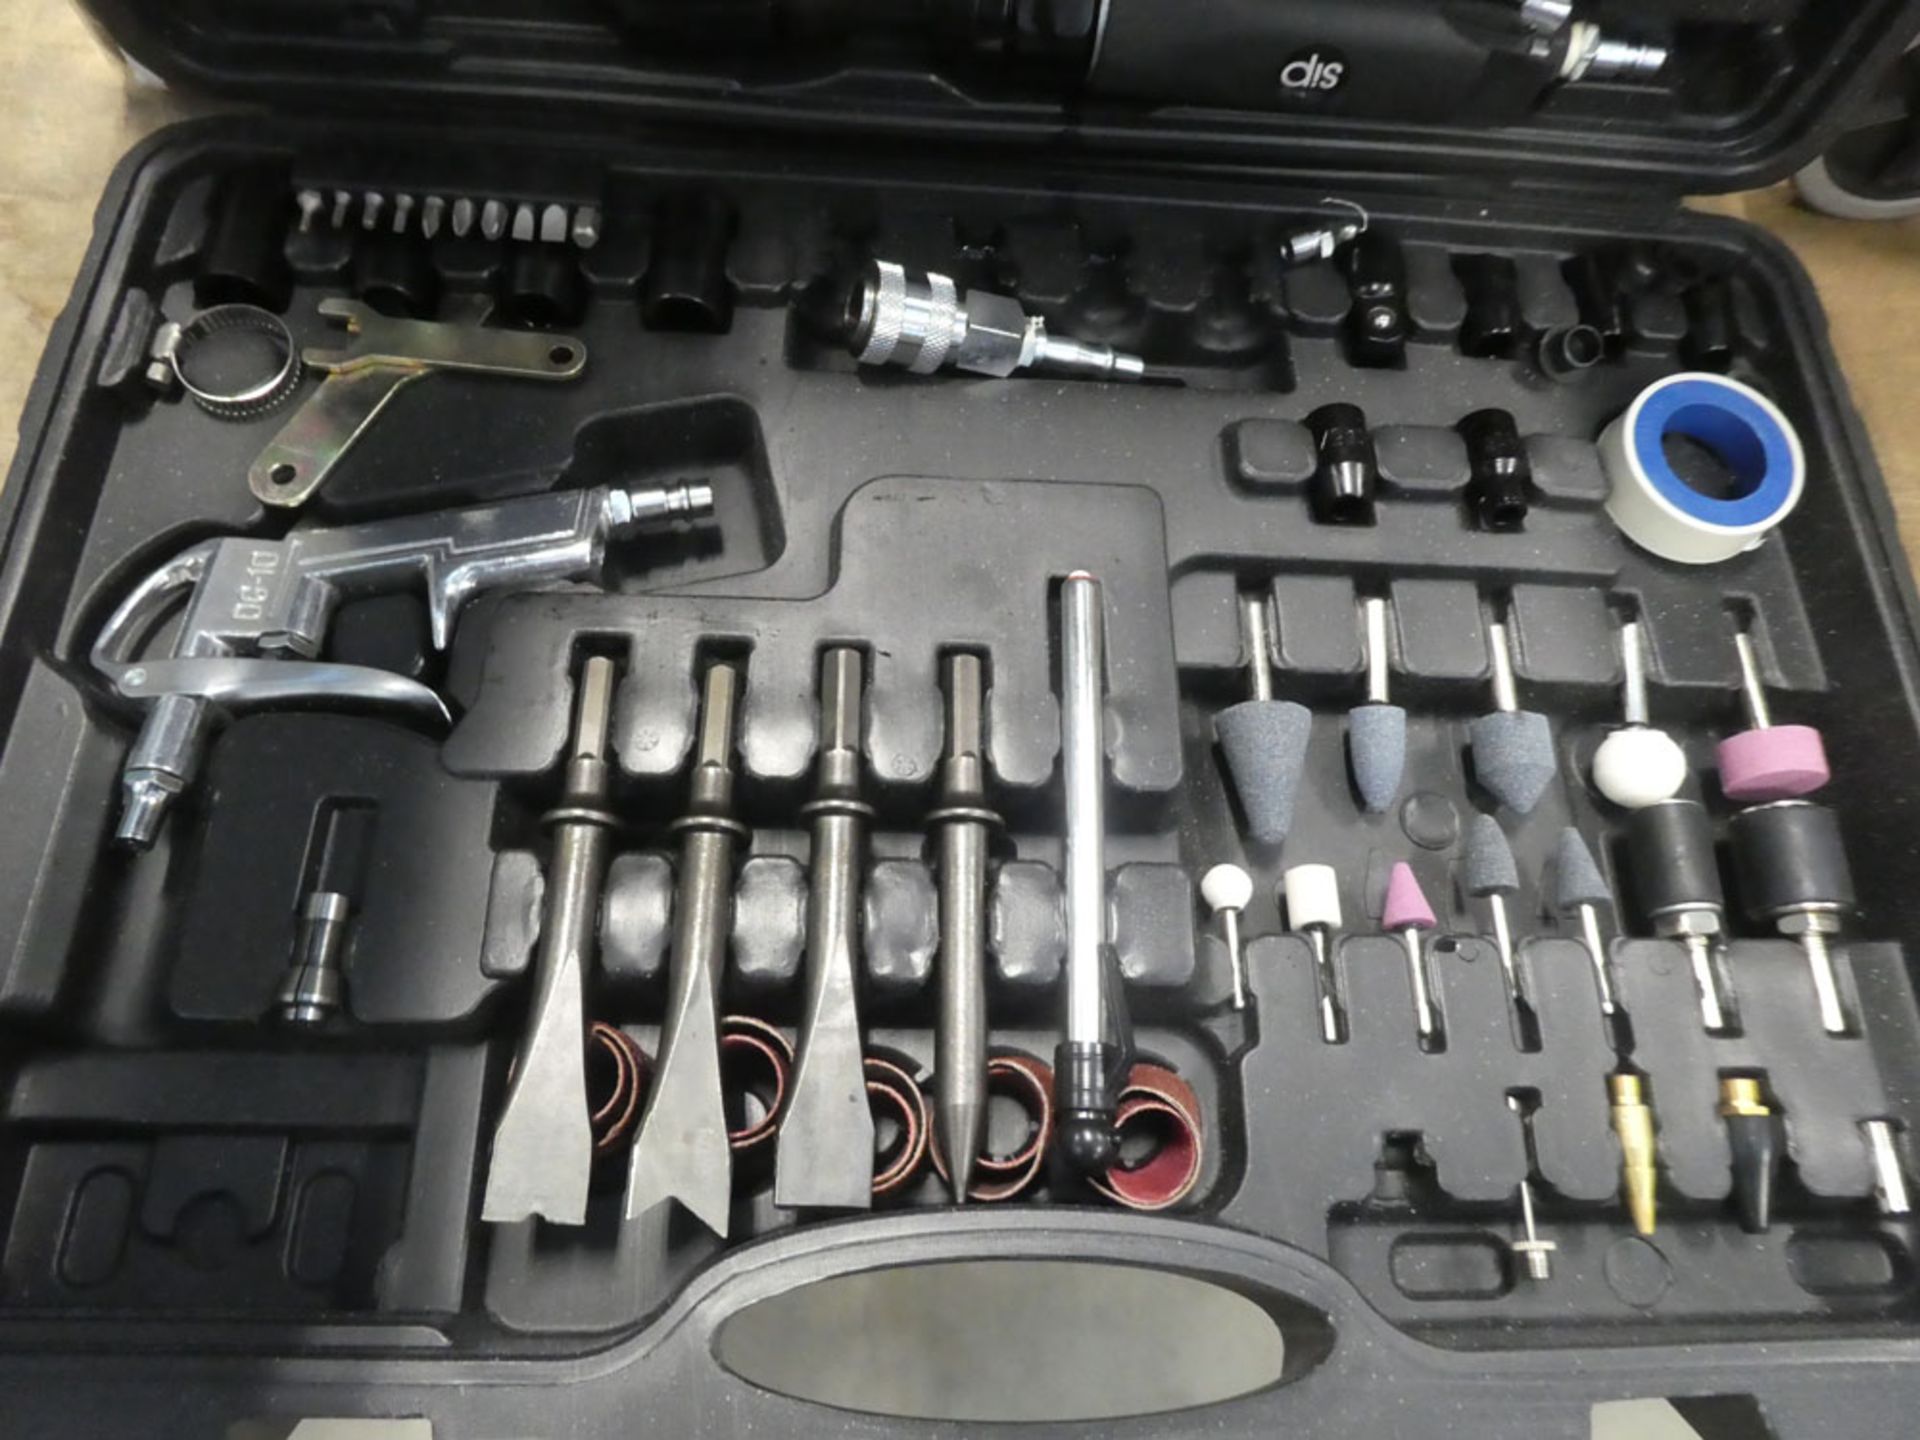 Silverline air tools kit - Image 3 of 3